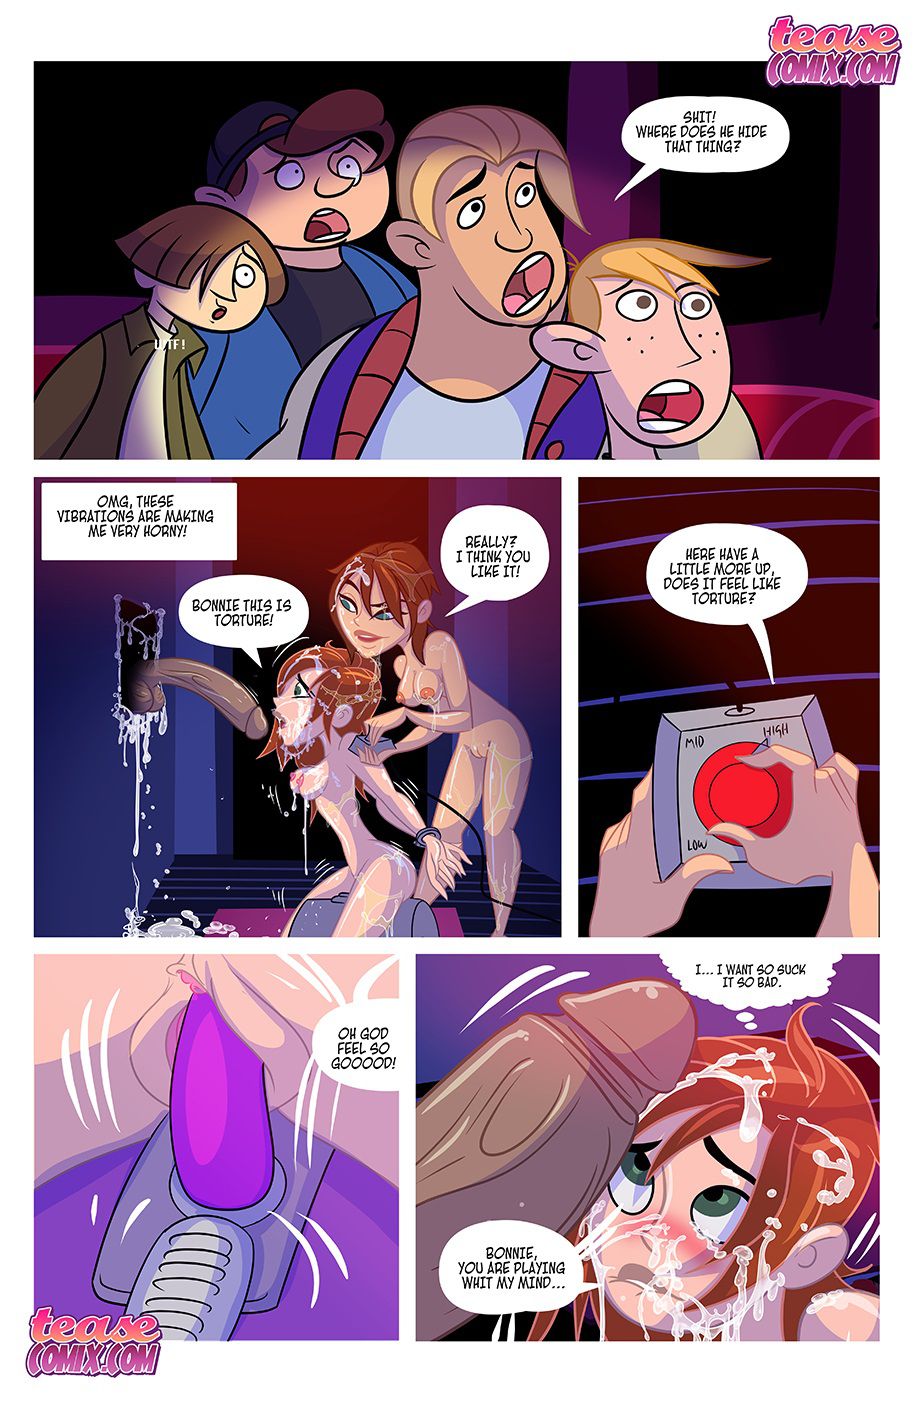 [Tease Comix] Cheer Fight (Kim Possible) 53